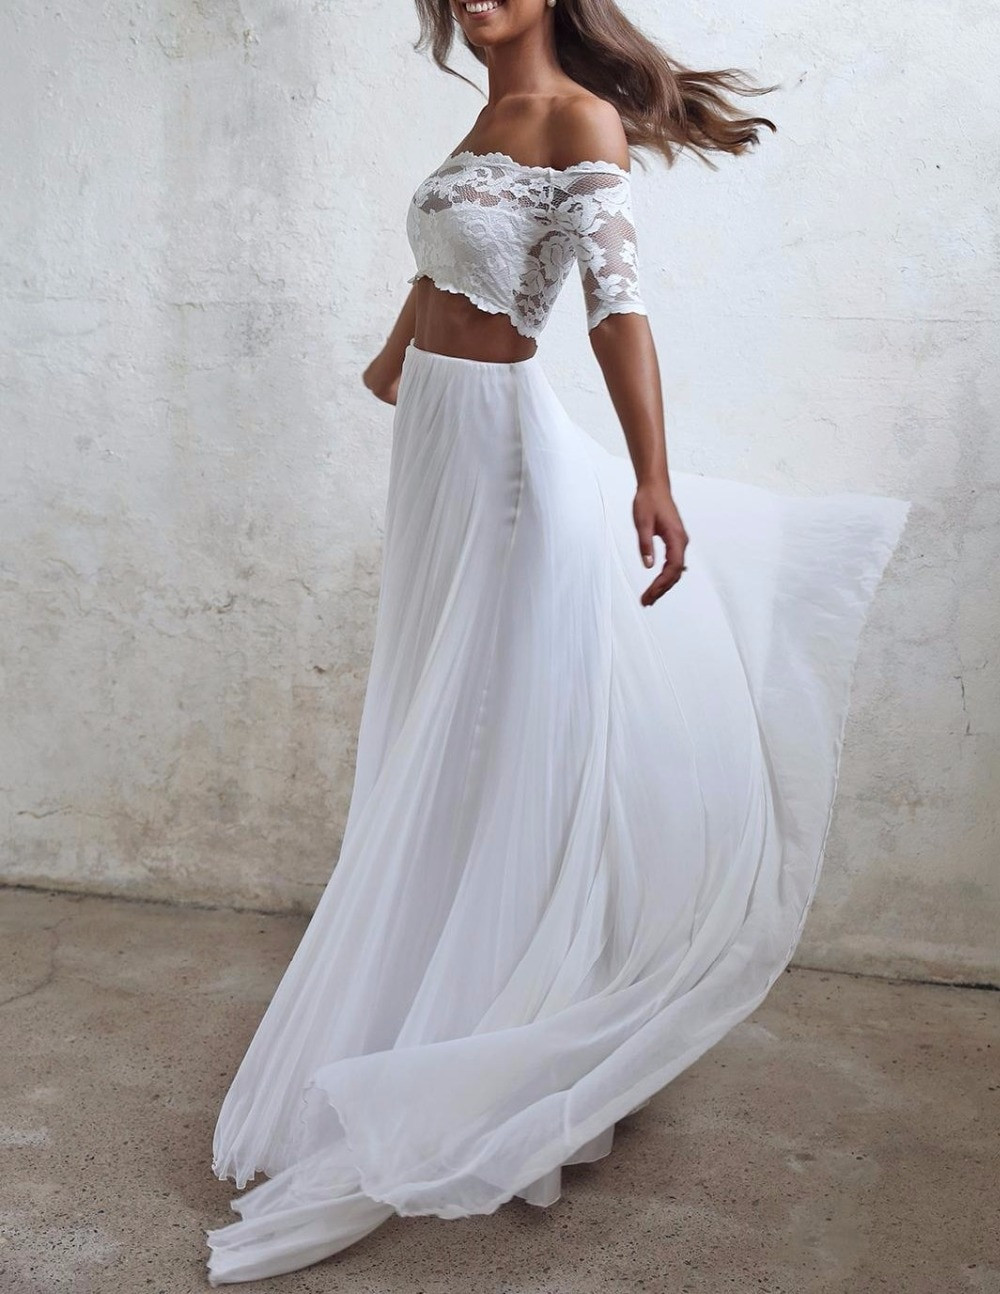 Two Piece Wedding Gown
 Seductive Lace 2 Two Piece Wedding Dresses Summer Chiffon